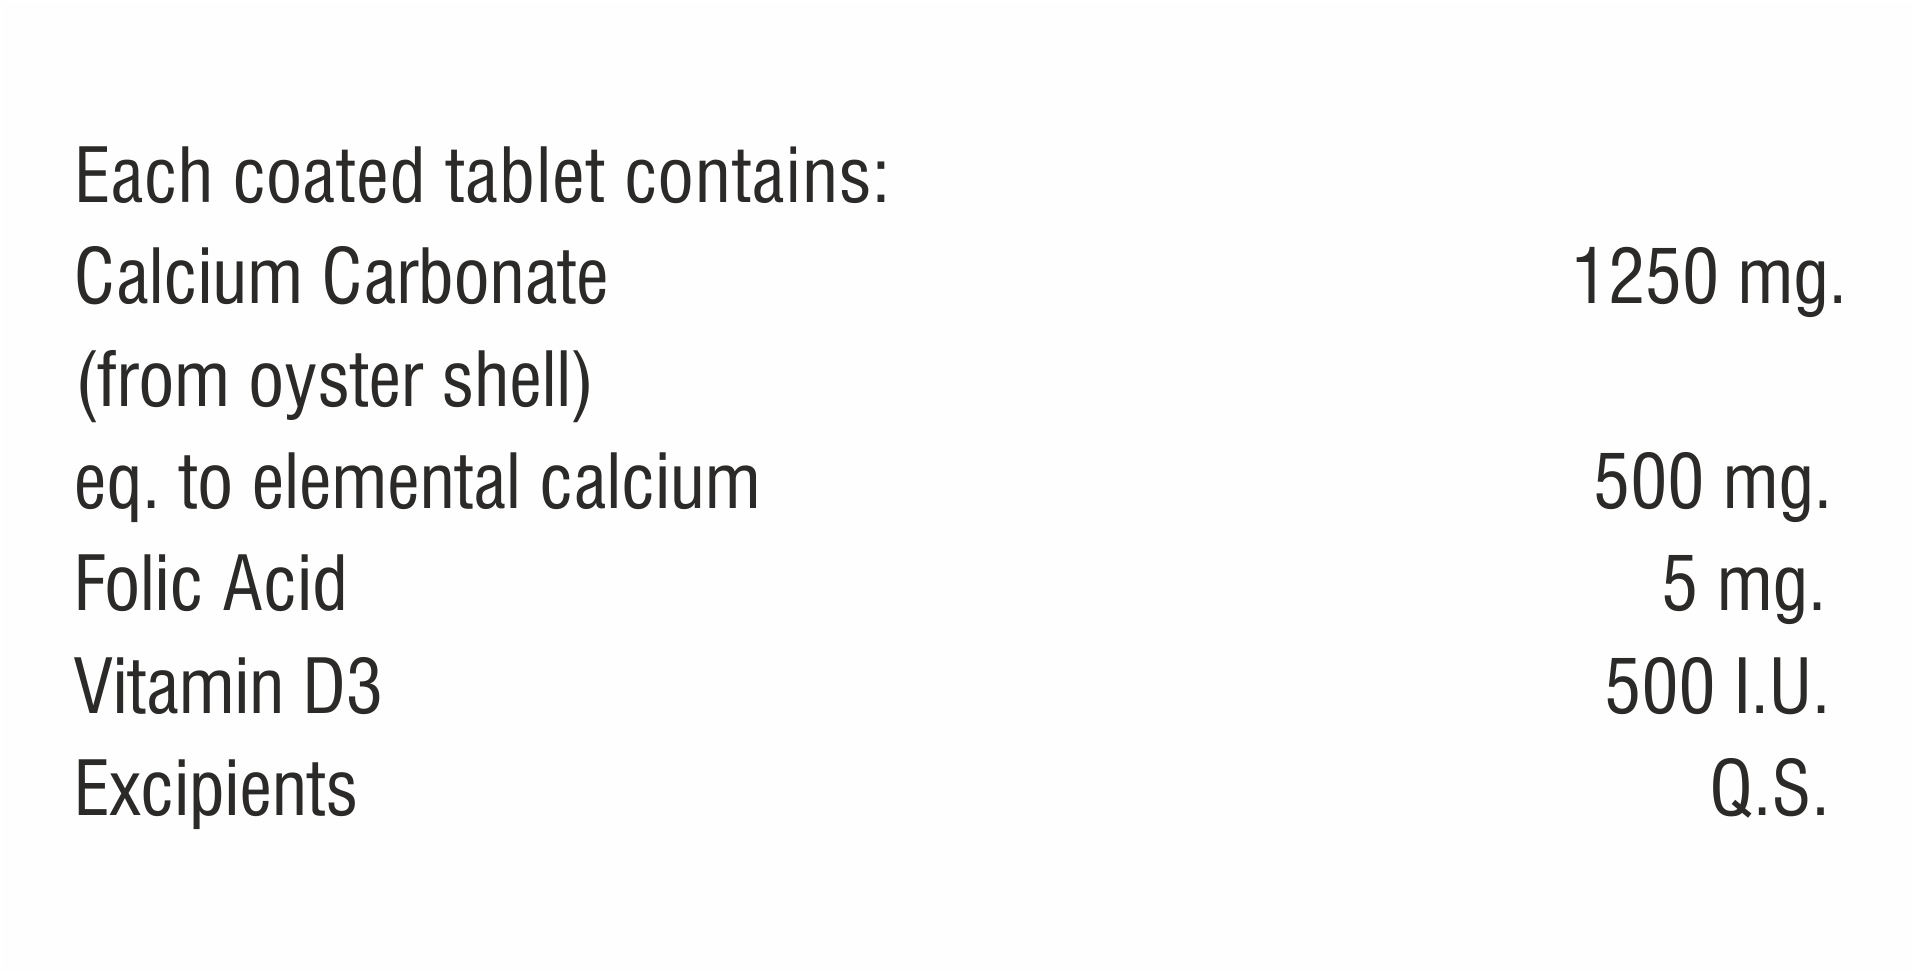 Calcium Carbonate With Foil Acid And Vitamin D3 Tablet